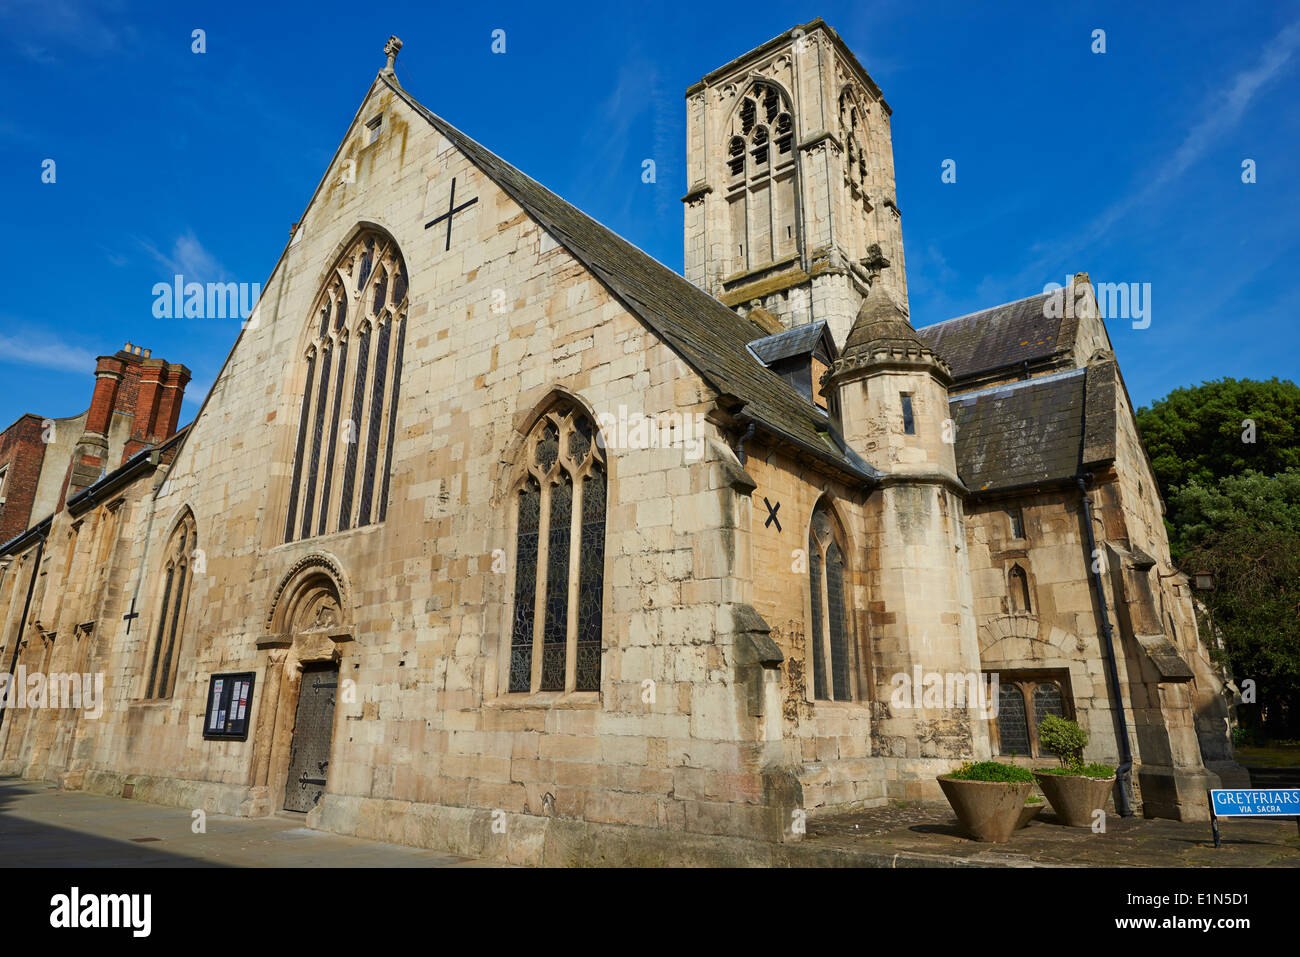 St Mary de Crypt Southgate Street Gloucester Gloucestershire UK Banque D'Images